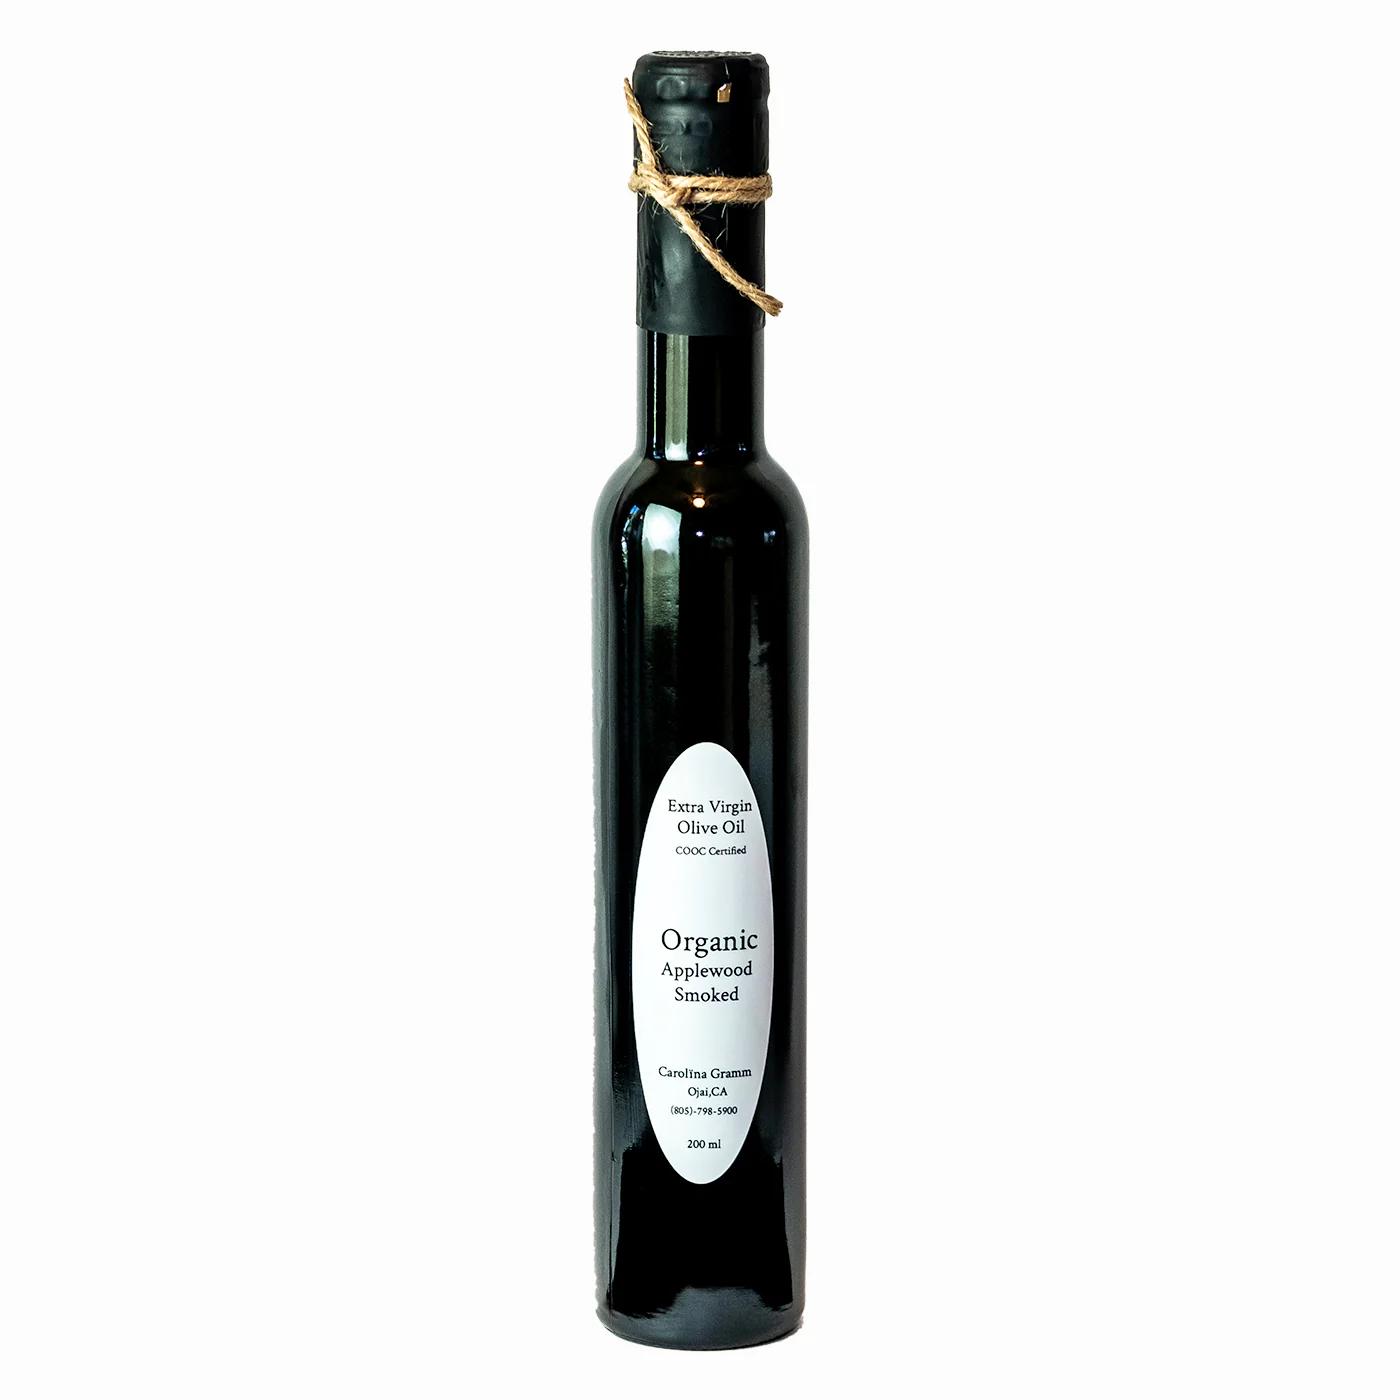 smoked evoo - Is EVOO the same as olive oil